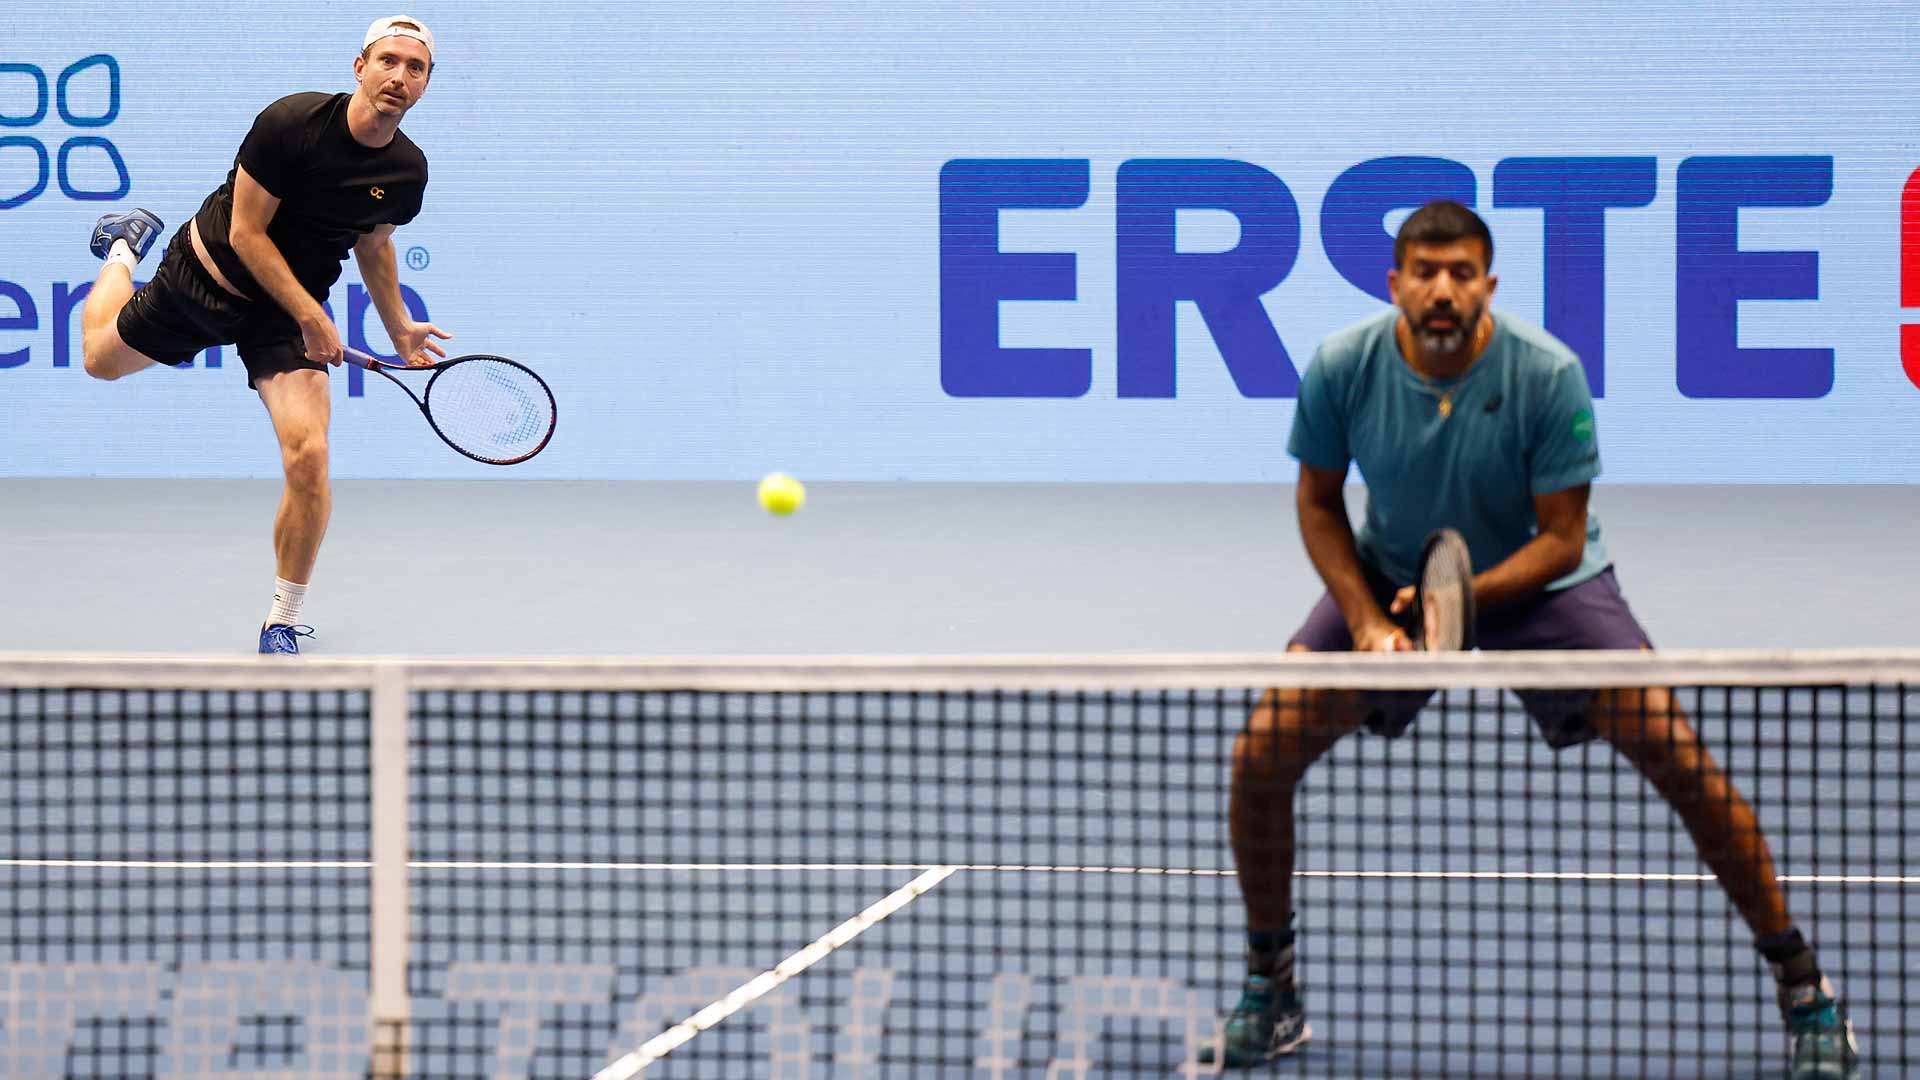 Matwe Middelkoop and Rohan Bopanna advance to the second round on Wednesday at the Erste Bank Open.